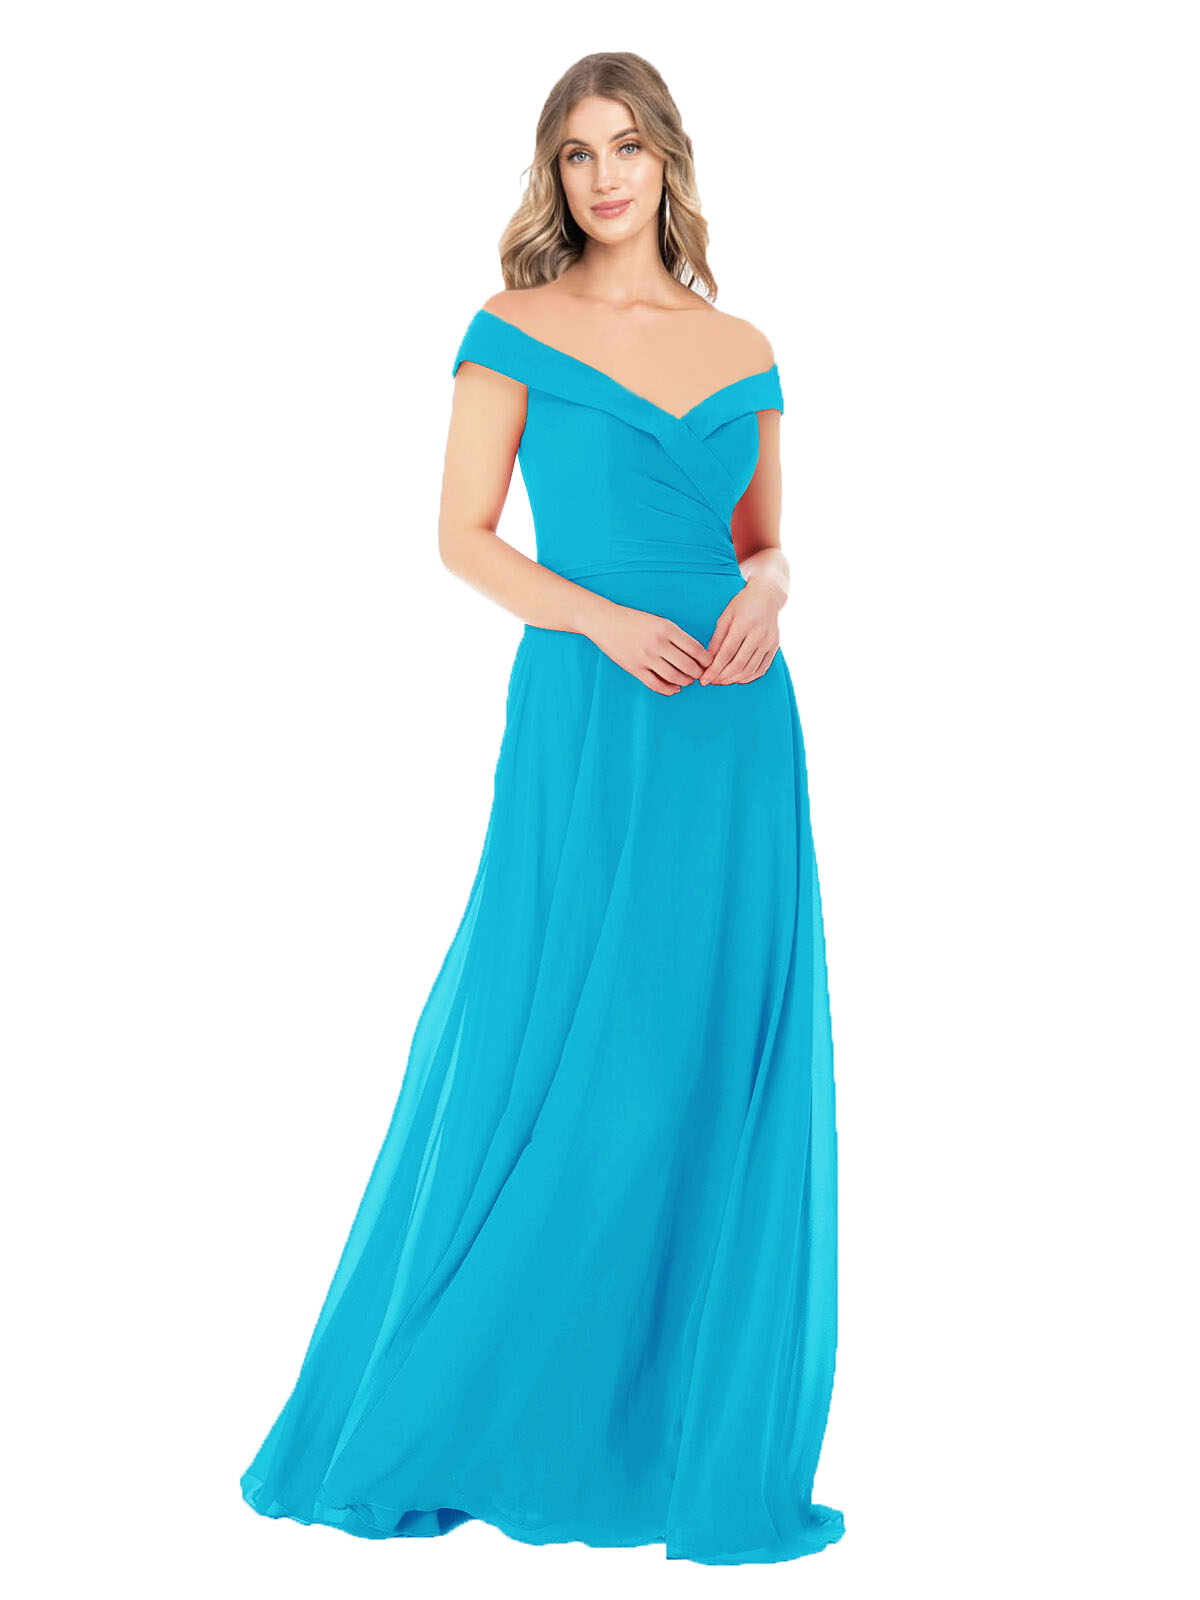 Turquoise A-Line Off the Shoulder Sleeveless Long Bridesmaid Dress Alva